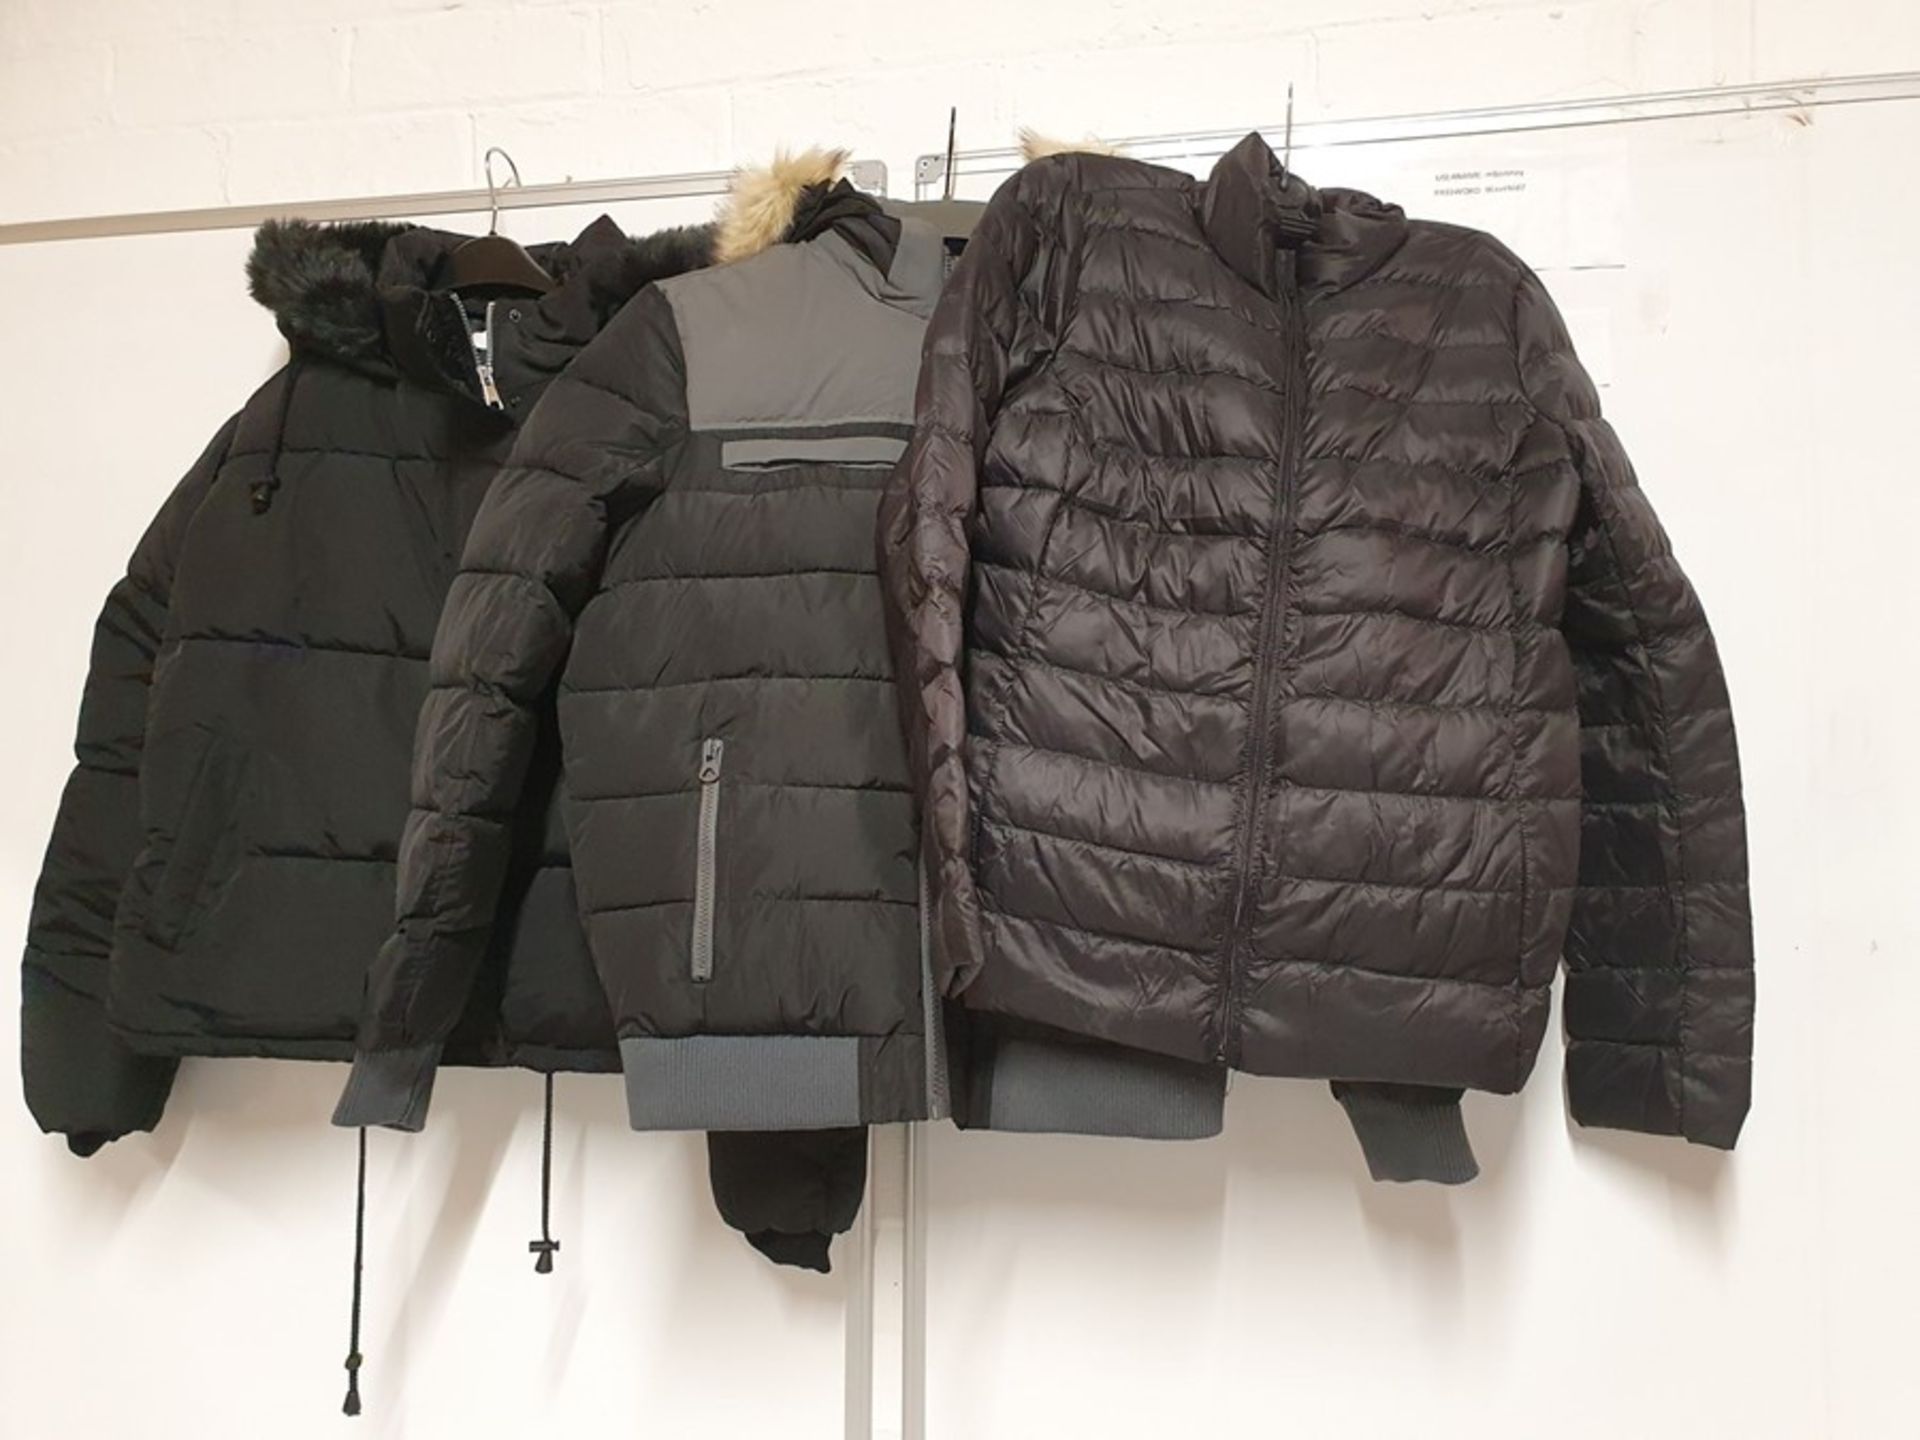 ONE LOT TO CONTAIN ONE BAG OF MIXED LADIES COATS / JACKETS - 8 ITEMS. (ASSORTED SIZES AND COLOURS,